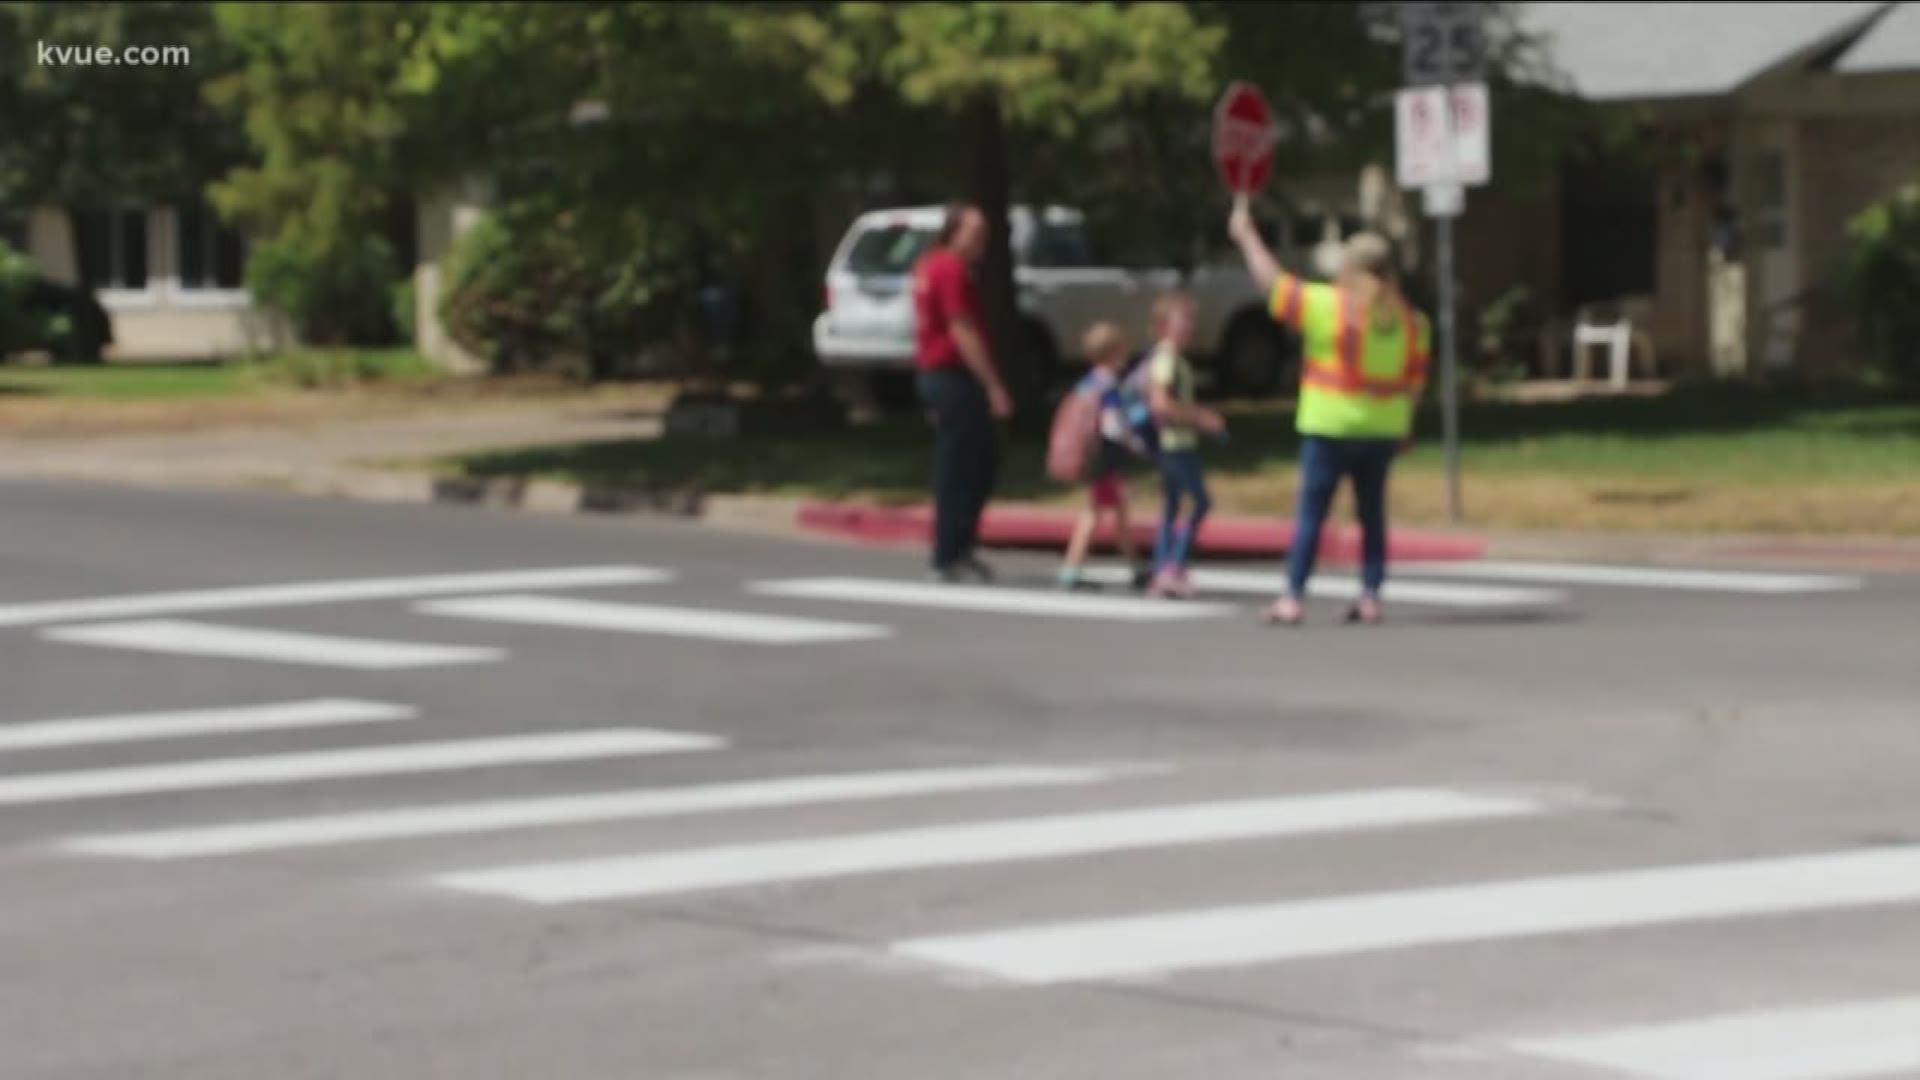 Wednesday is International Walk to School Day and KVUE's Kalyn Norwood shares how local schools are taking part in keeping students safe.